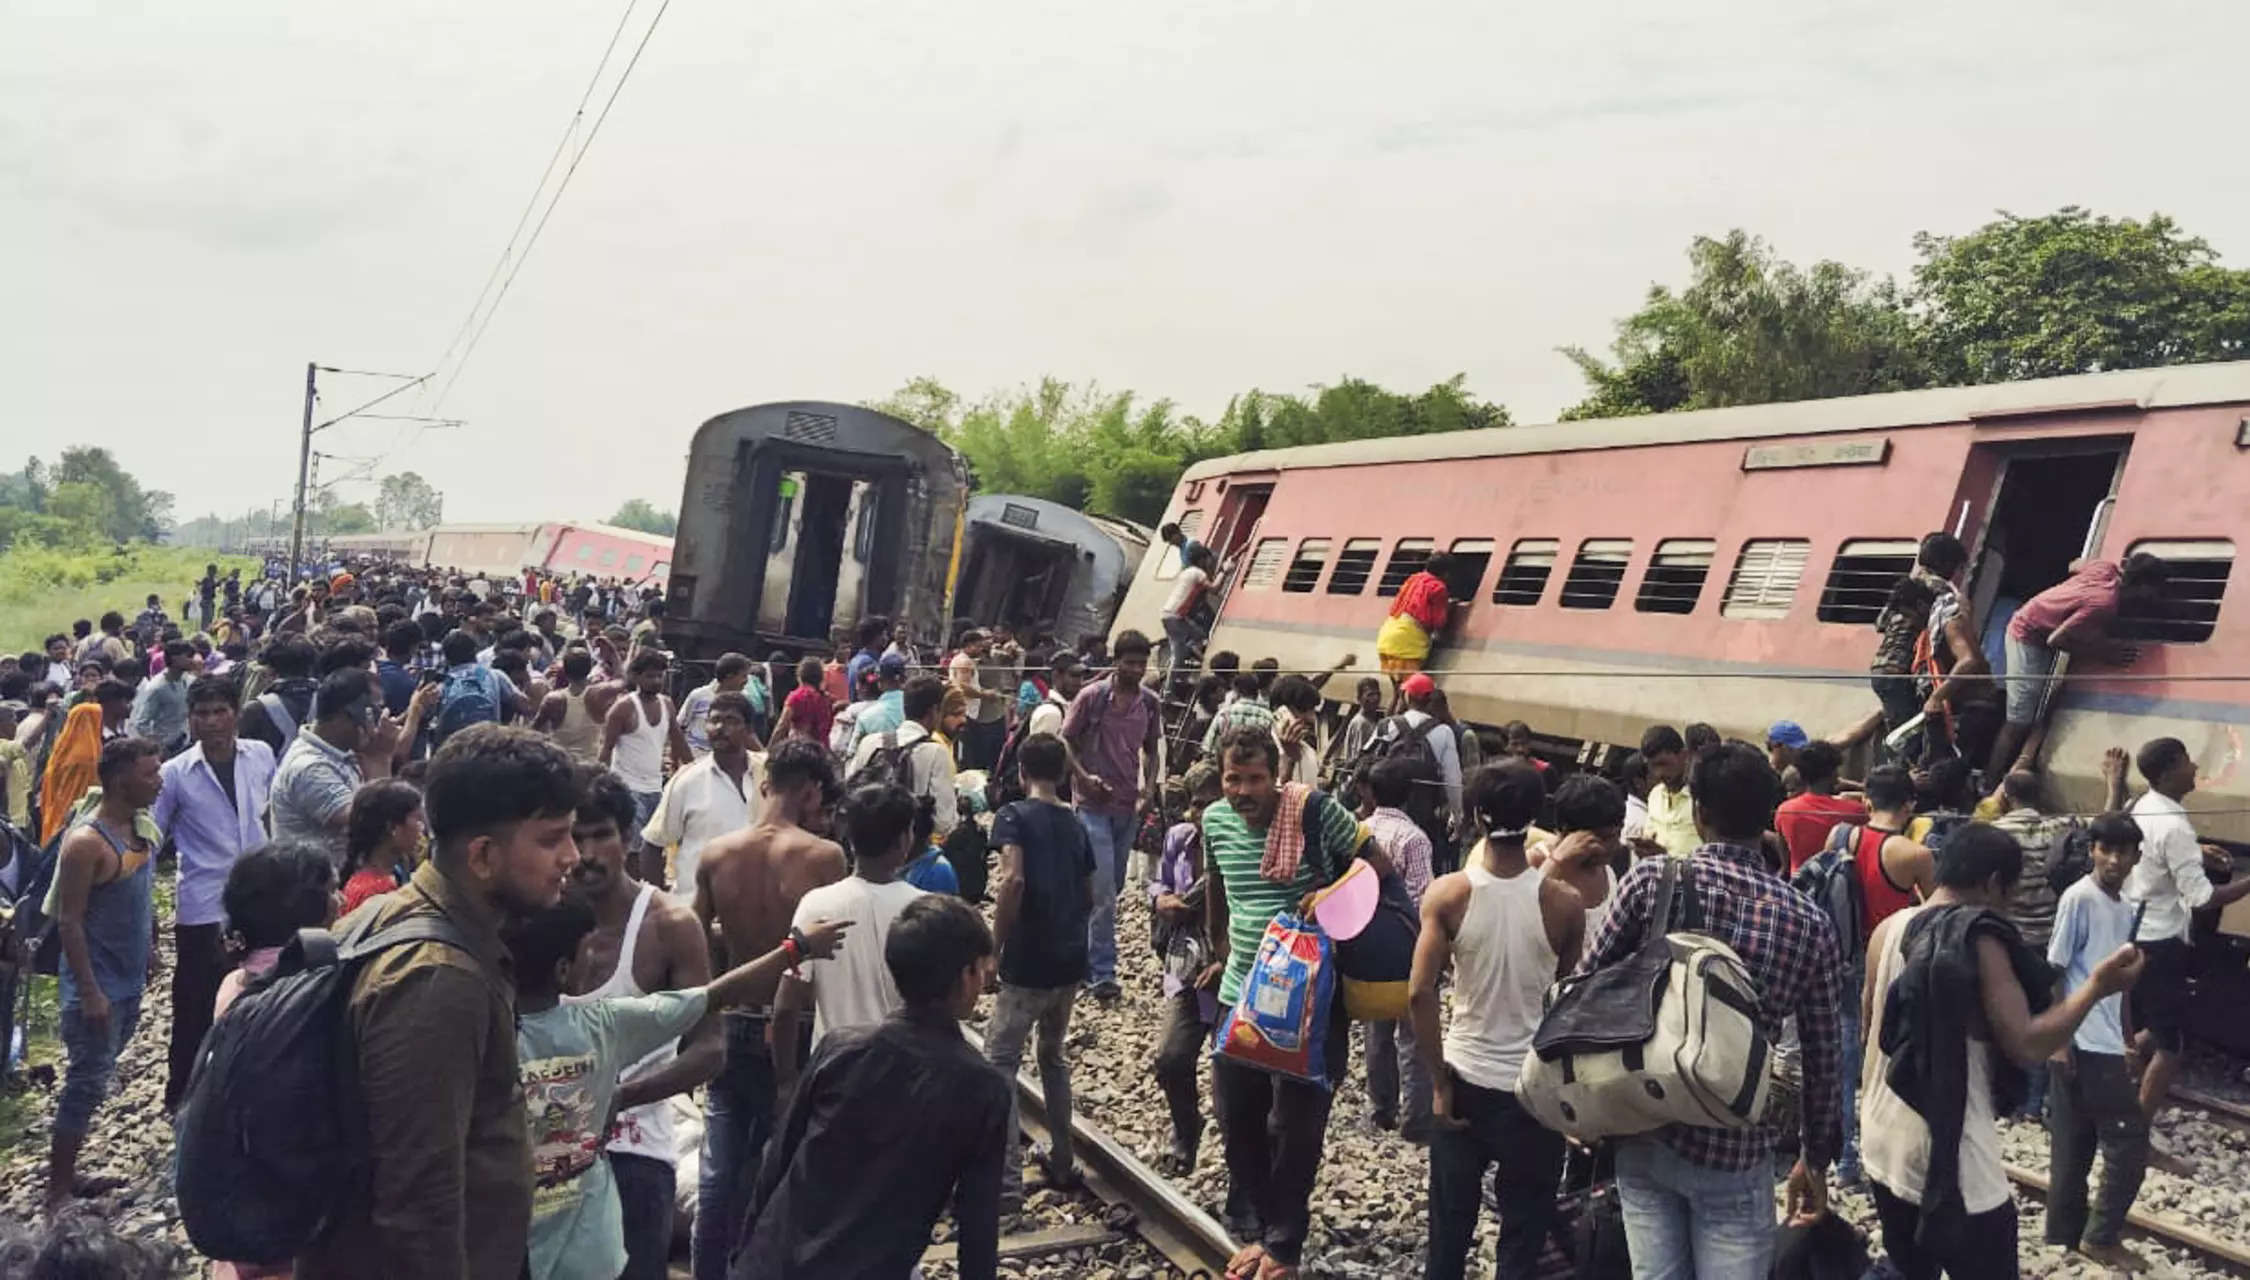 Gonda Train Accident: List of trains cancelled or diverted after Dibrugarh Express derailment in UP 